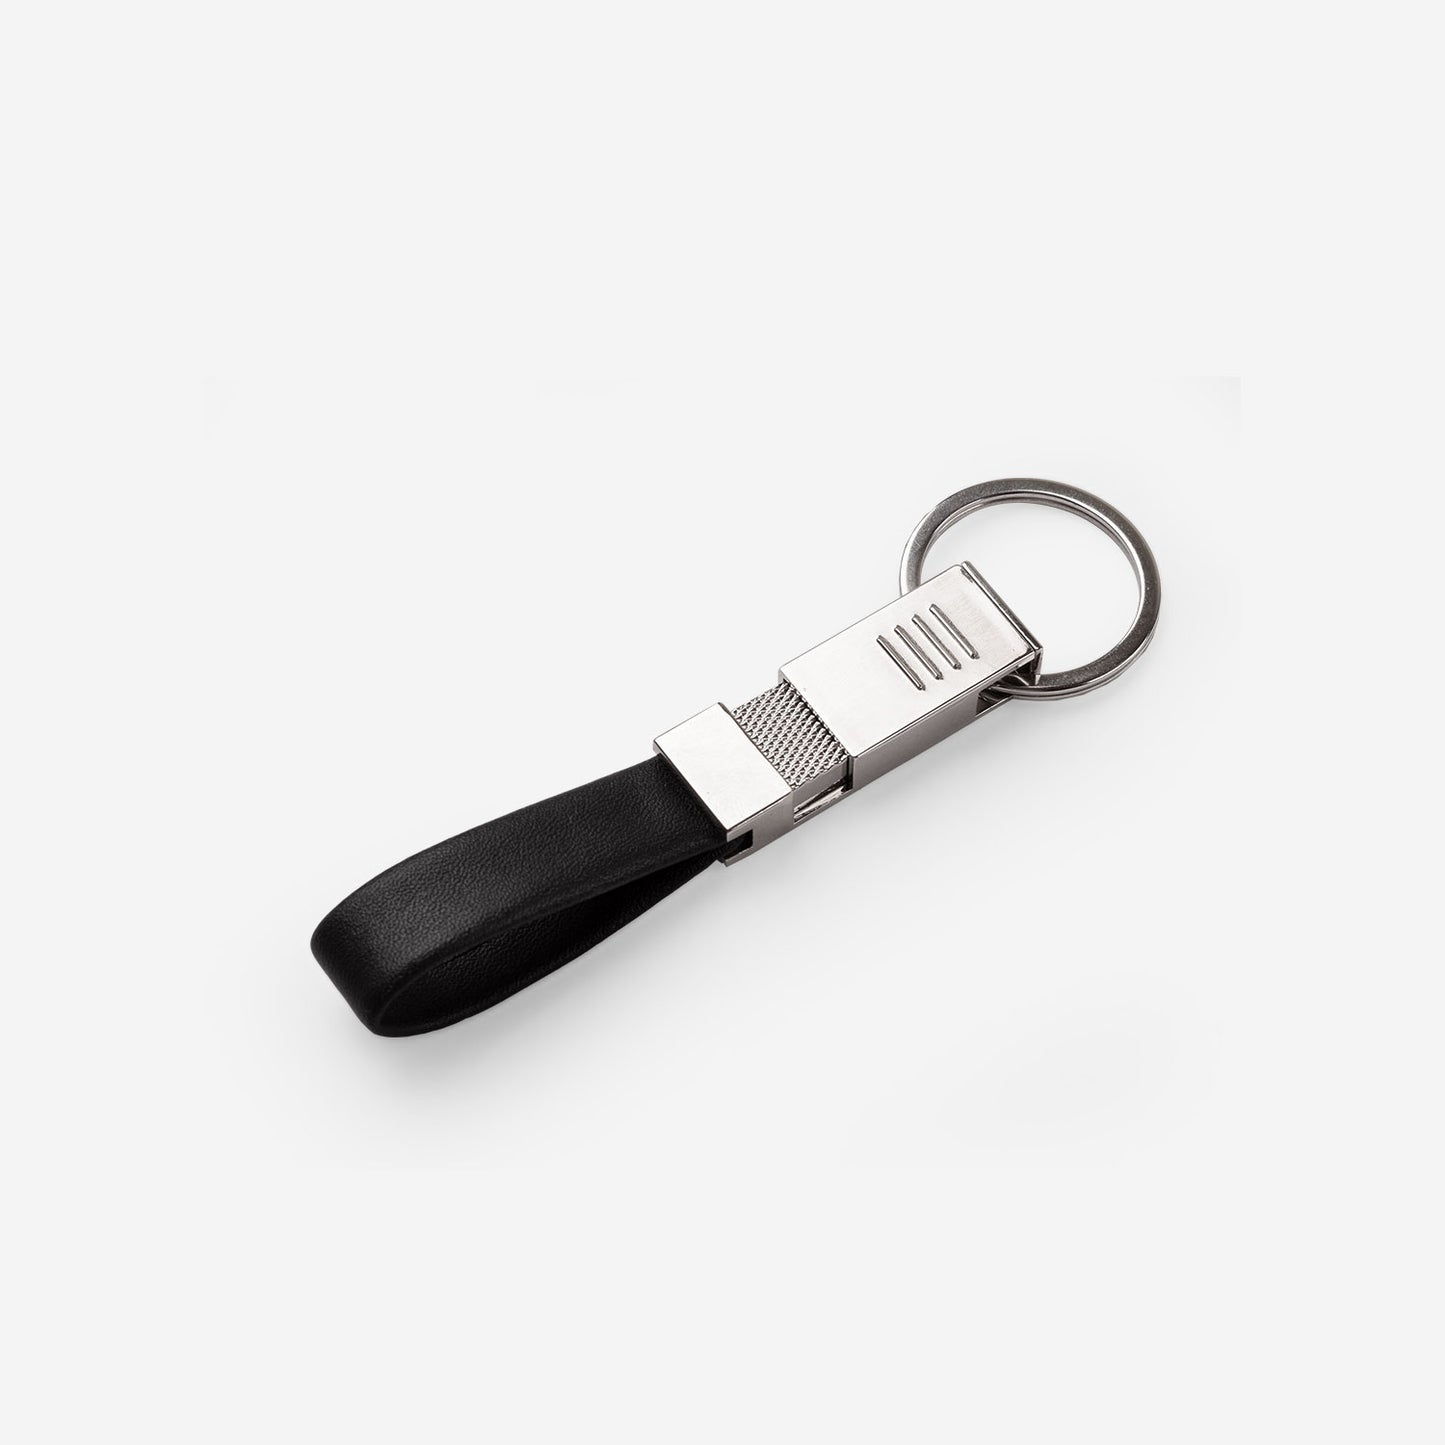 leather Key Chain